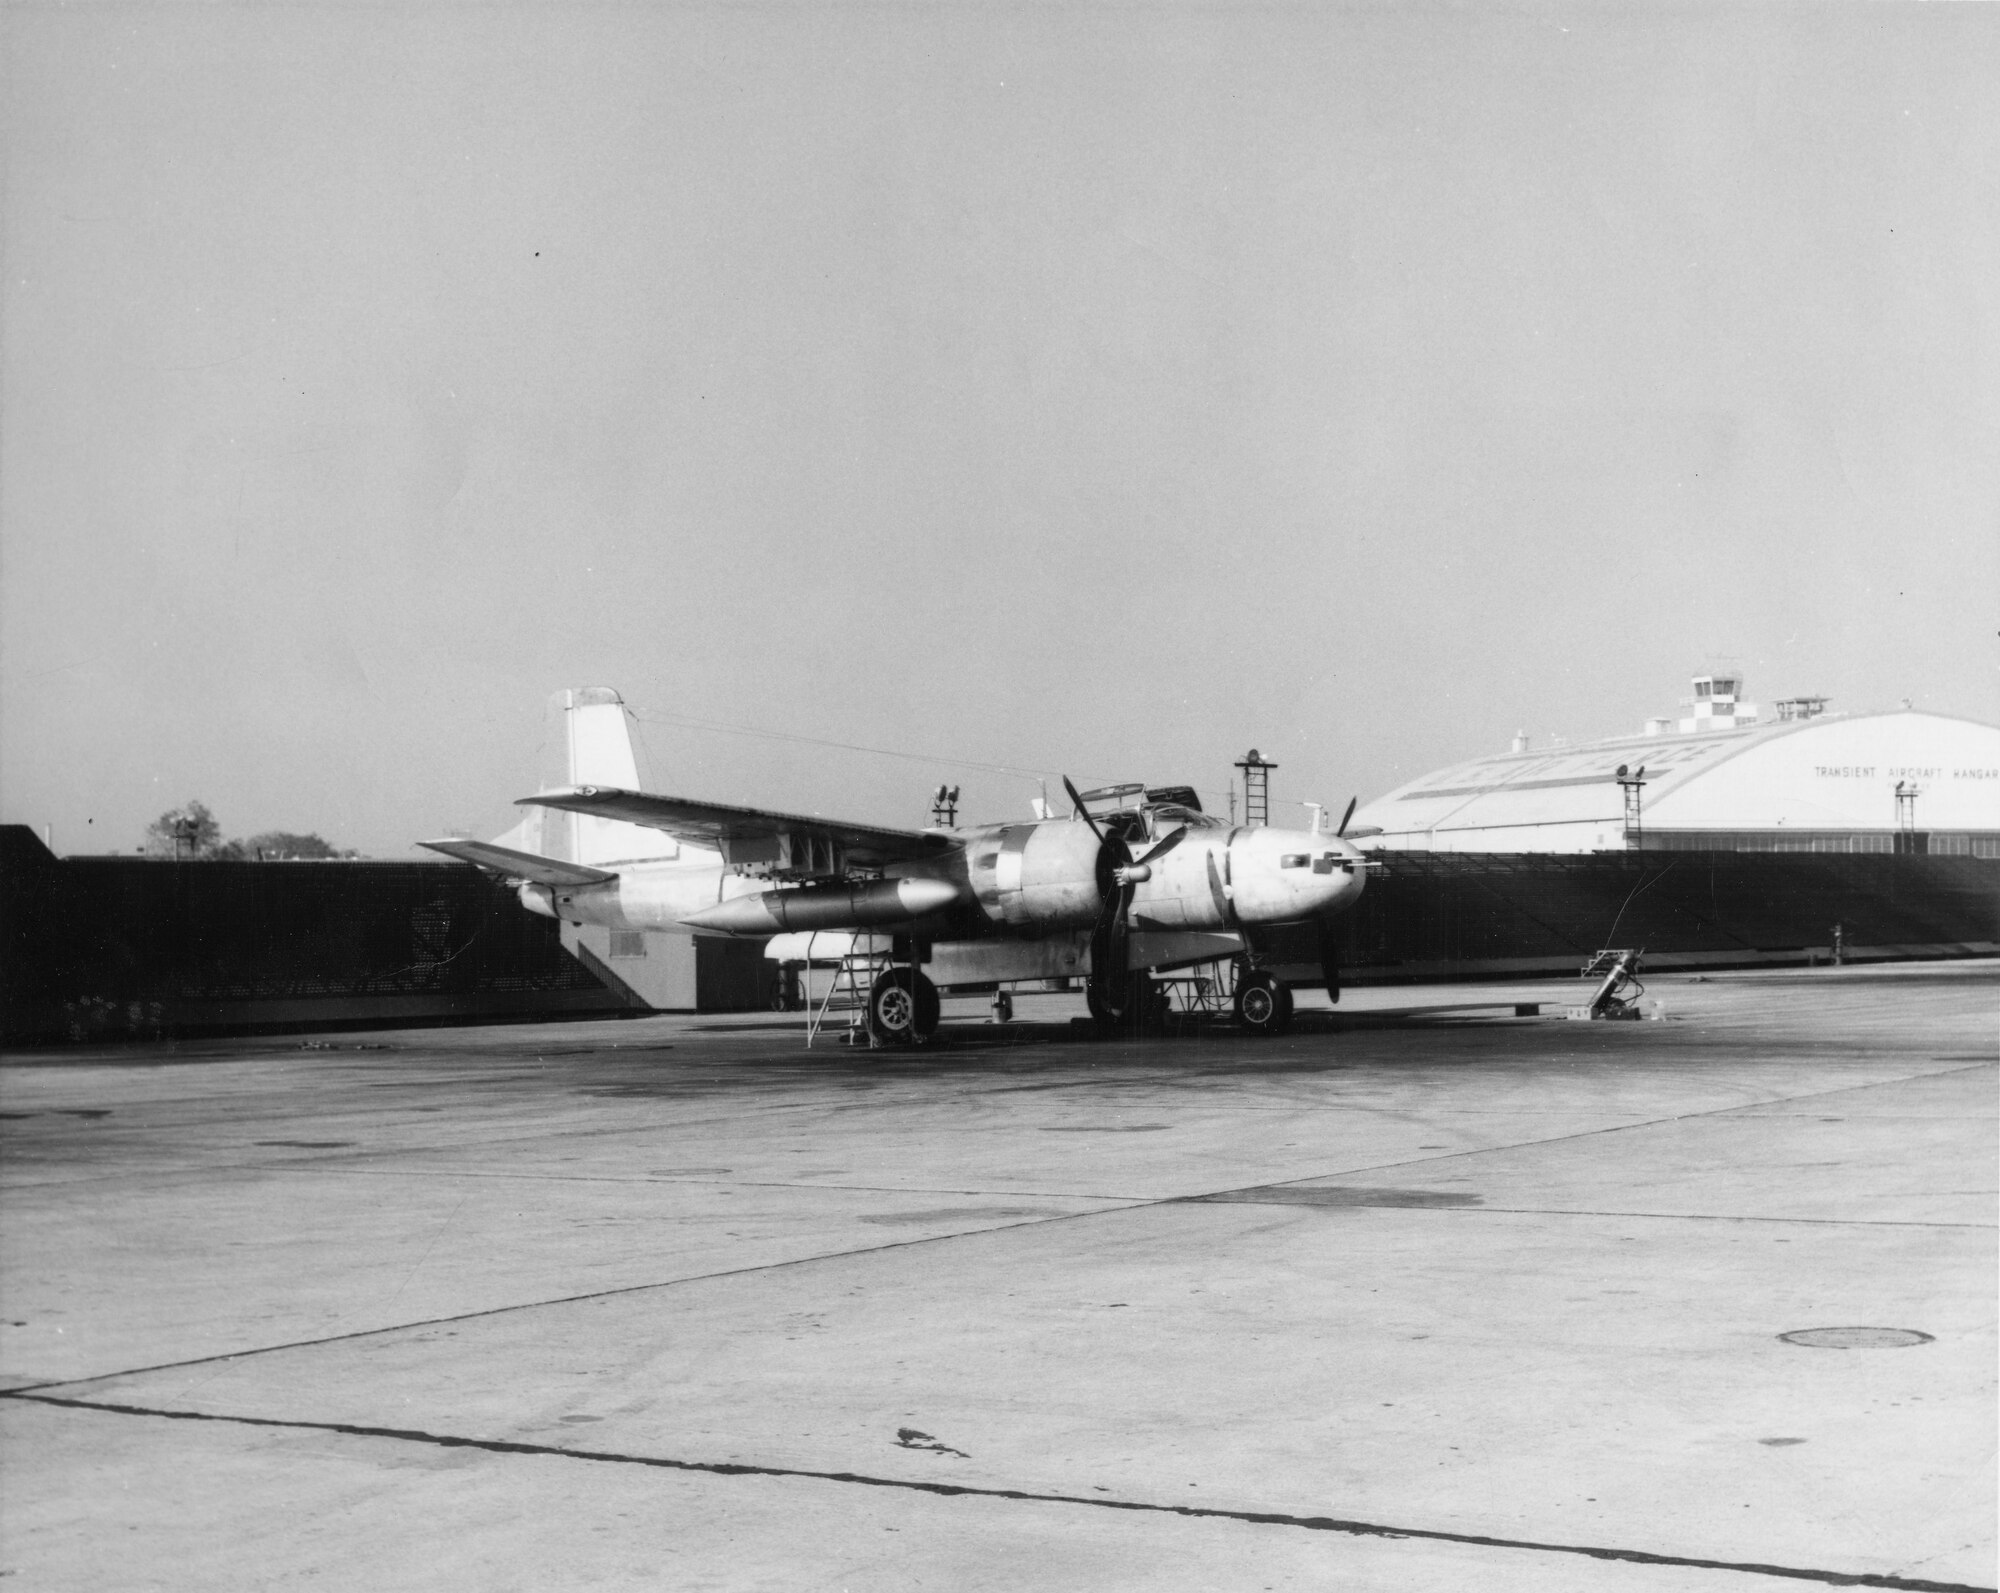 In the mid-1960s, B-26s were modified and strengthened into the B-26K Counter Invader variant for operational use in Southeast Asia.